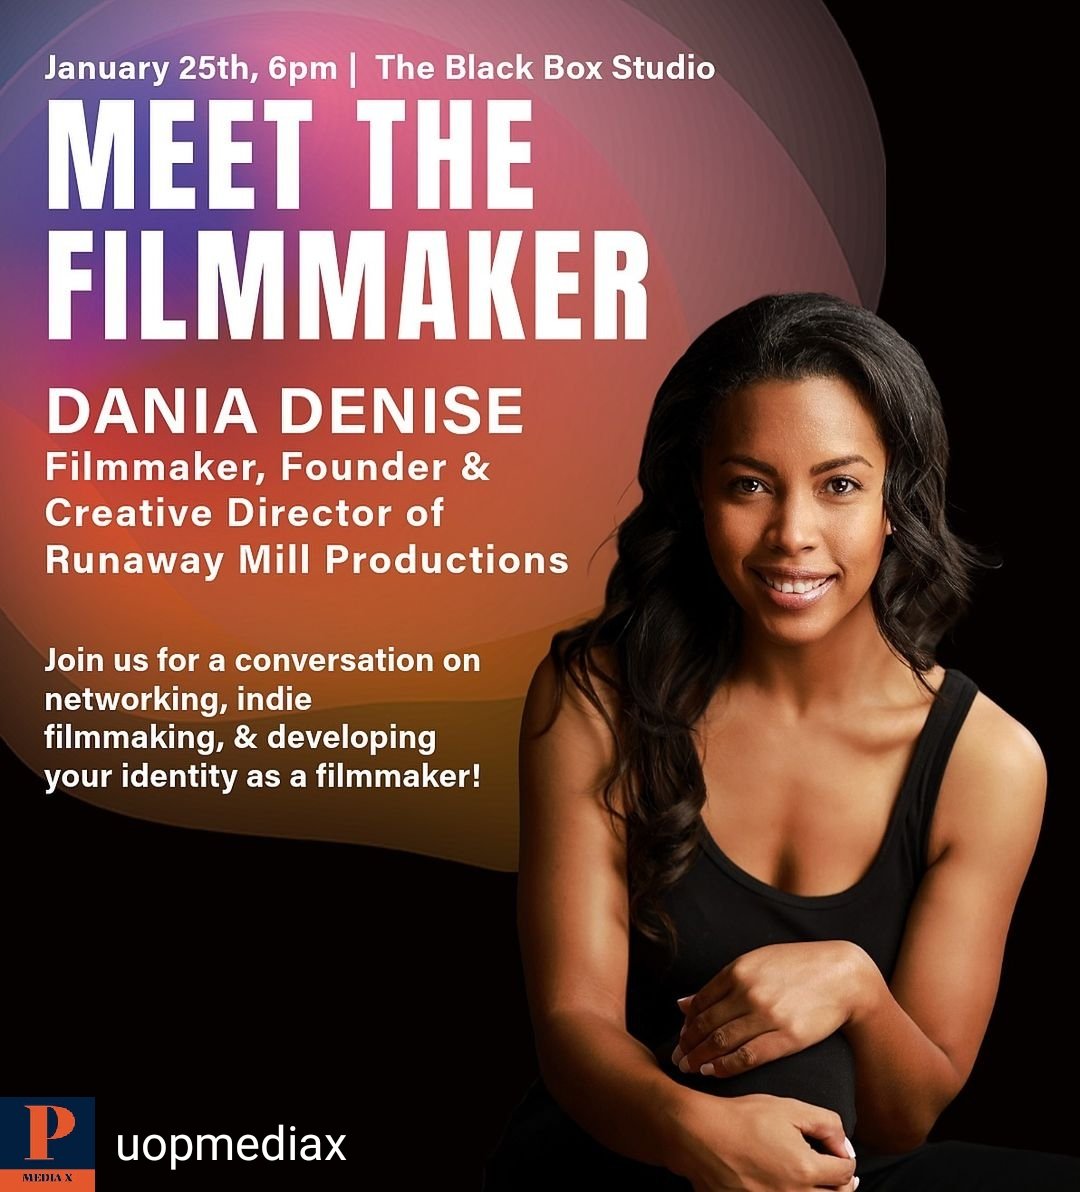 Reposted from @UOPMediaX Join us for a conversation with writer, director, & producer Dania Denise about networking, indie filmmaking & more! The event is open to everyone, filmmakers are specially encouraged to attend! 📍The Black Box Studio is located in the Drama building